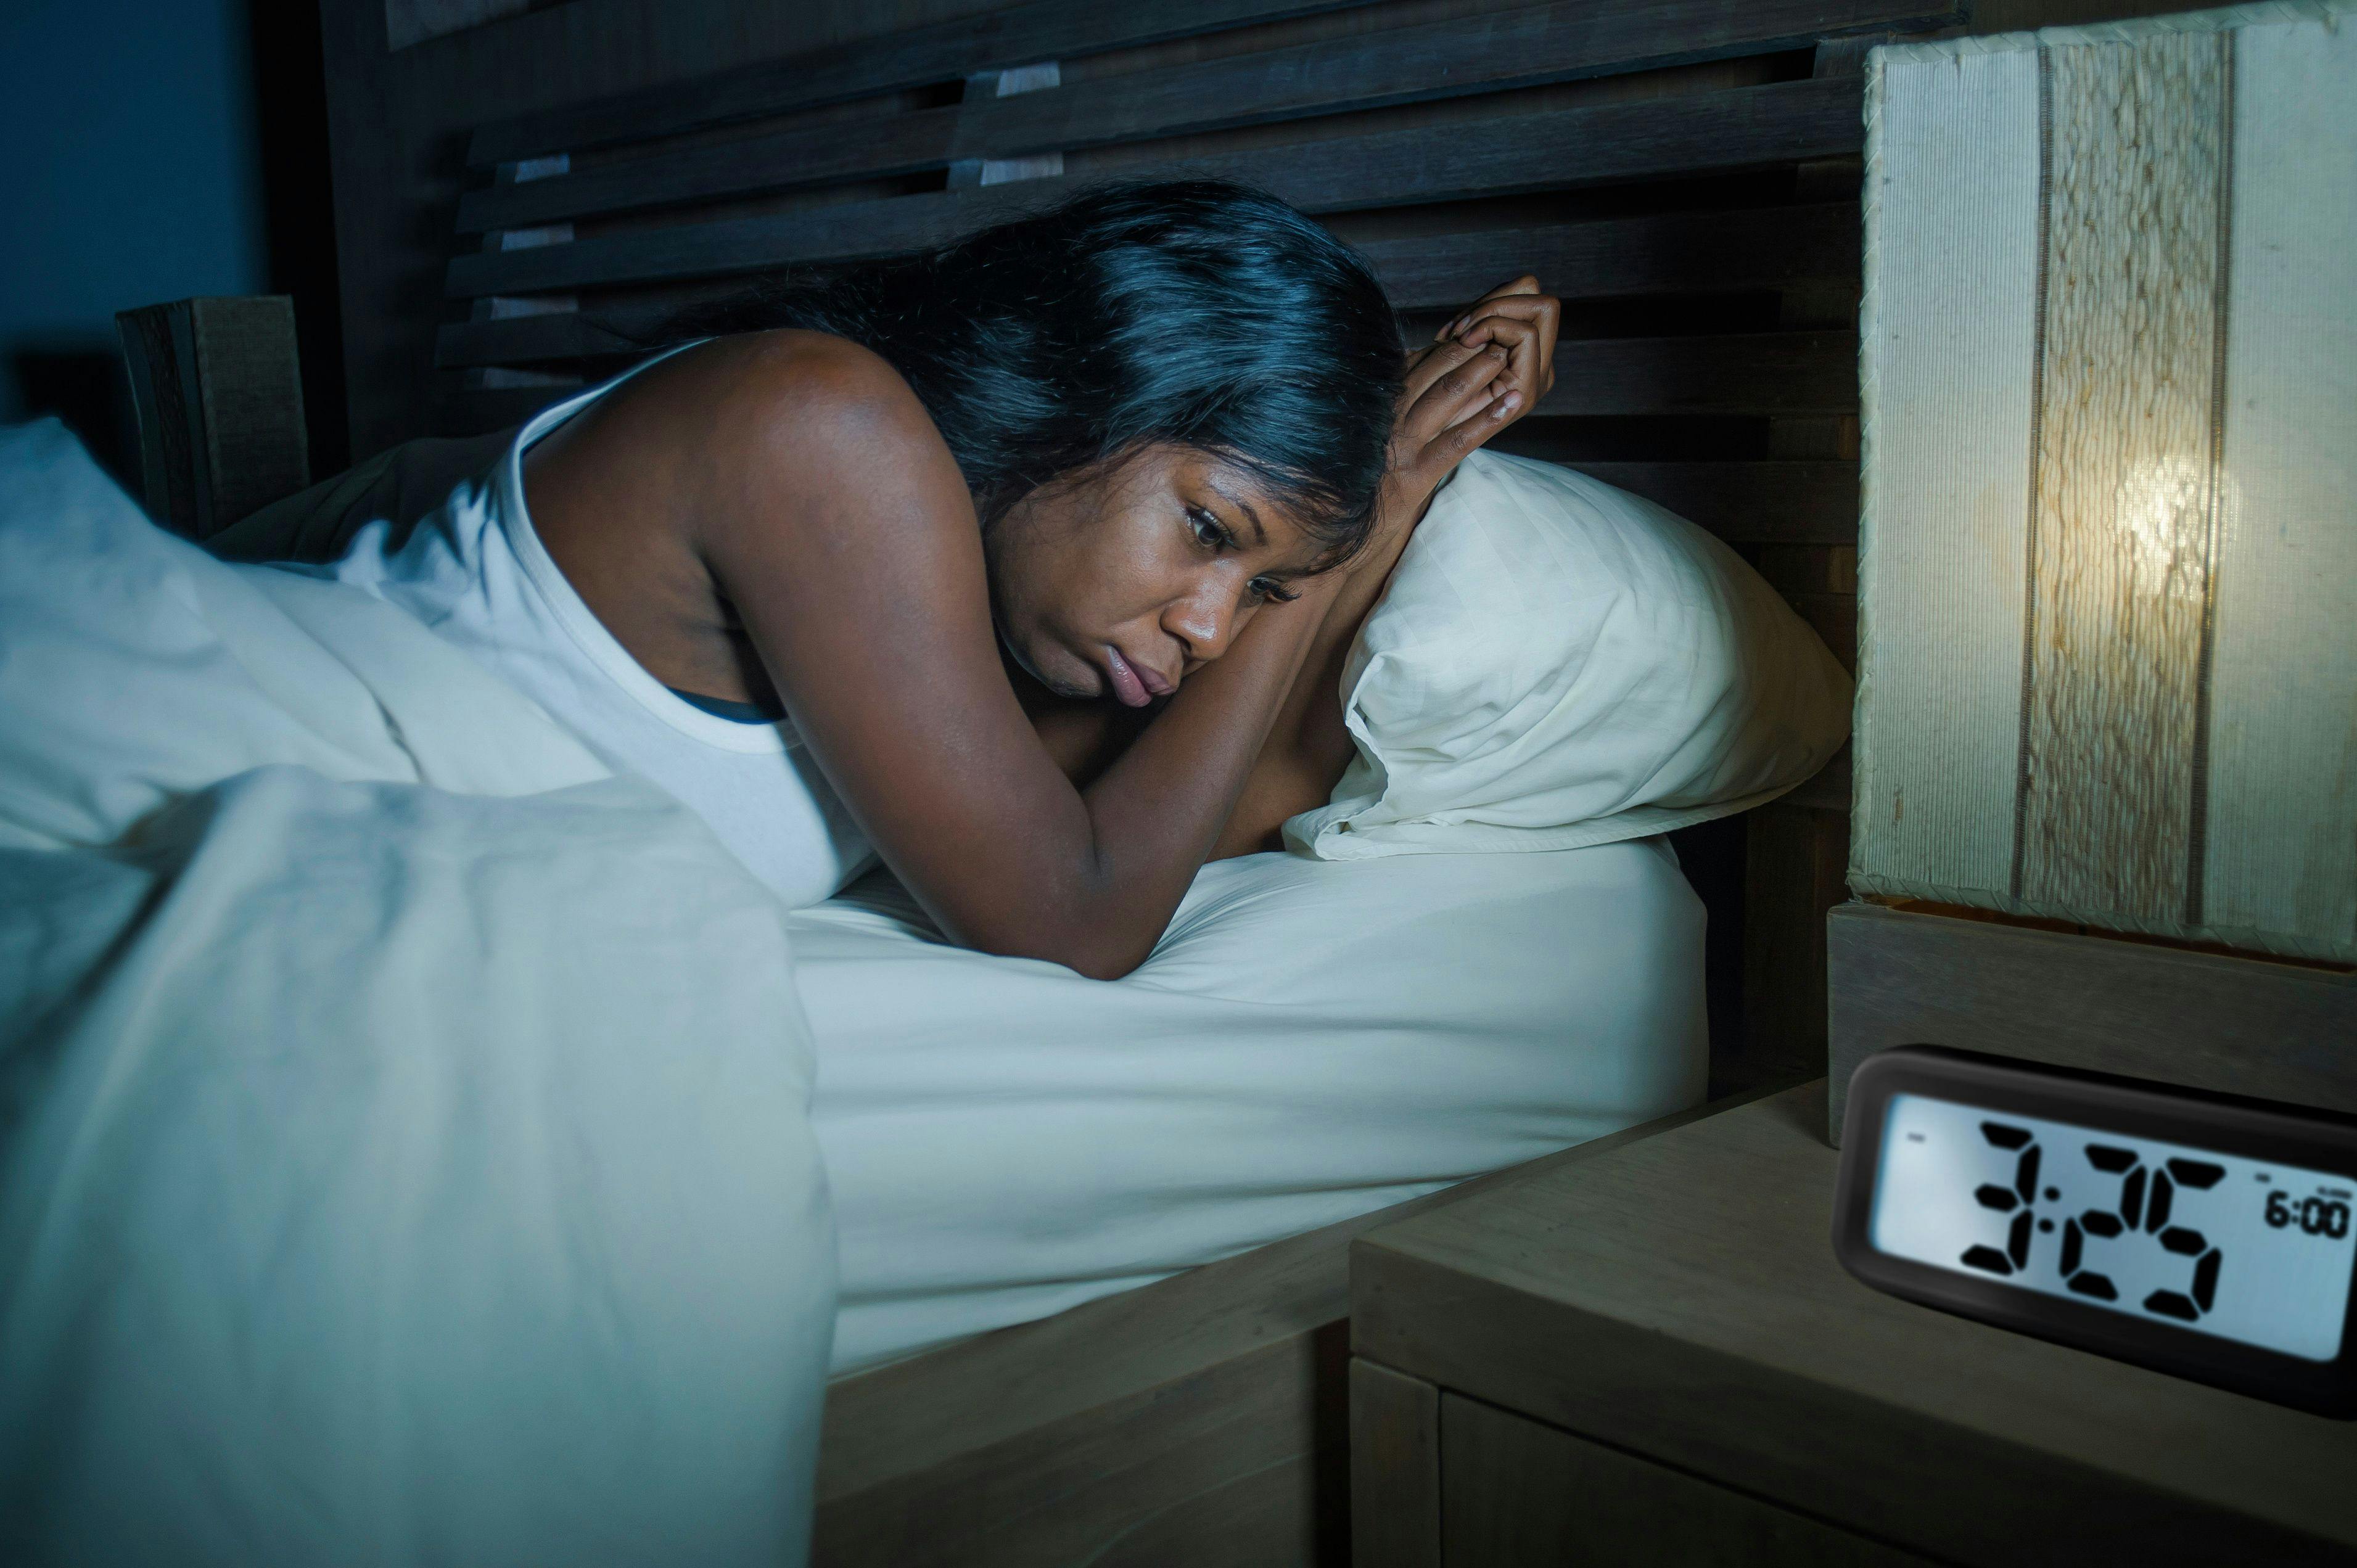 Black patients diagnosed with insomnia are half as likely to be prescribed an FDA-approved insomnia medication than White patients, according to findings reported in Sleep Health.

© The VisualsYouNeed stock.adobe.com

